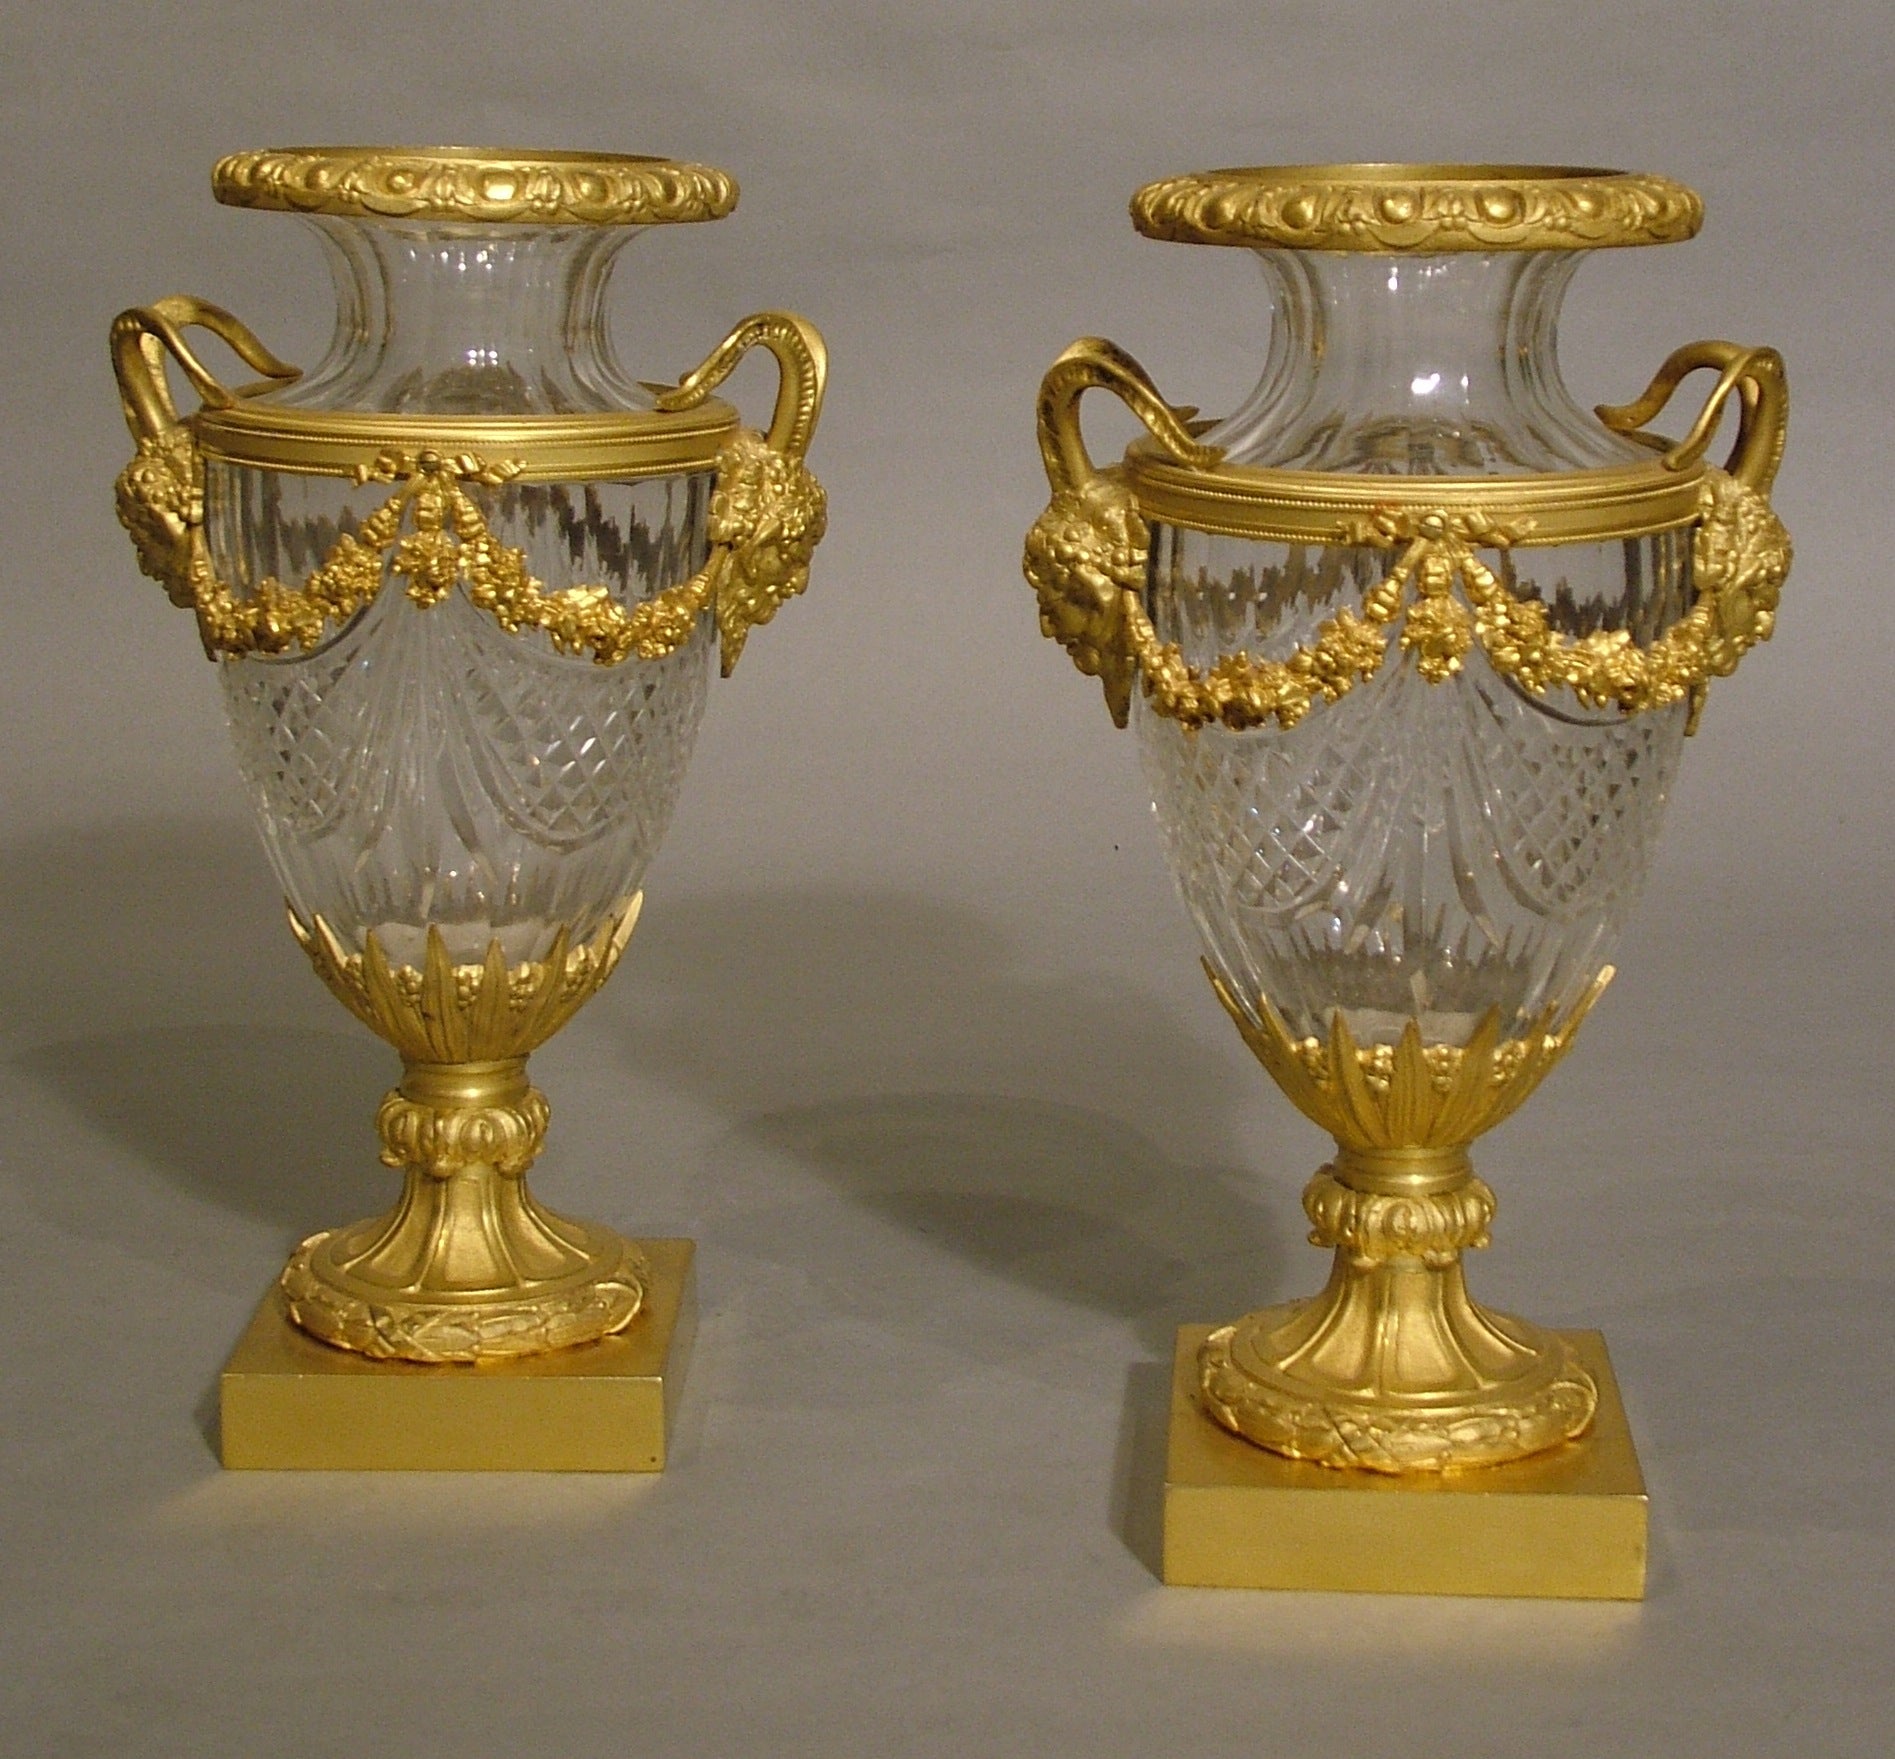  Pair of French Crystal and Gilt Bronze Mantle Urns in the Louis XVI Manner